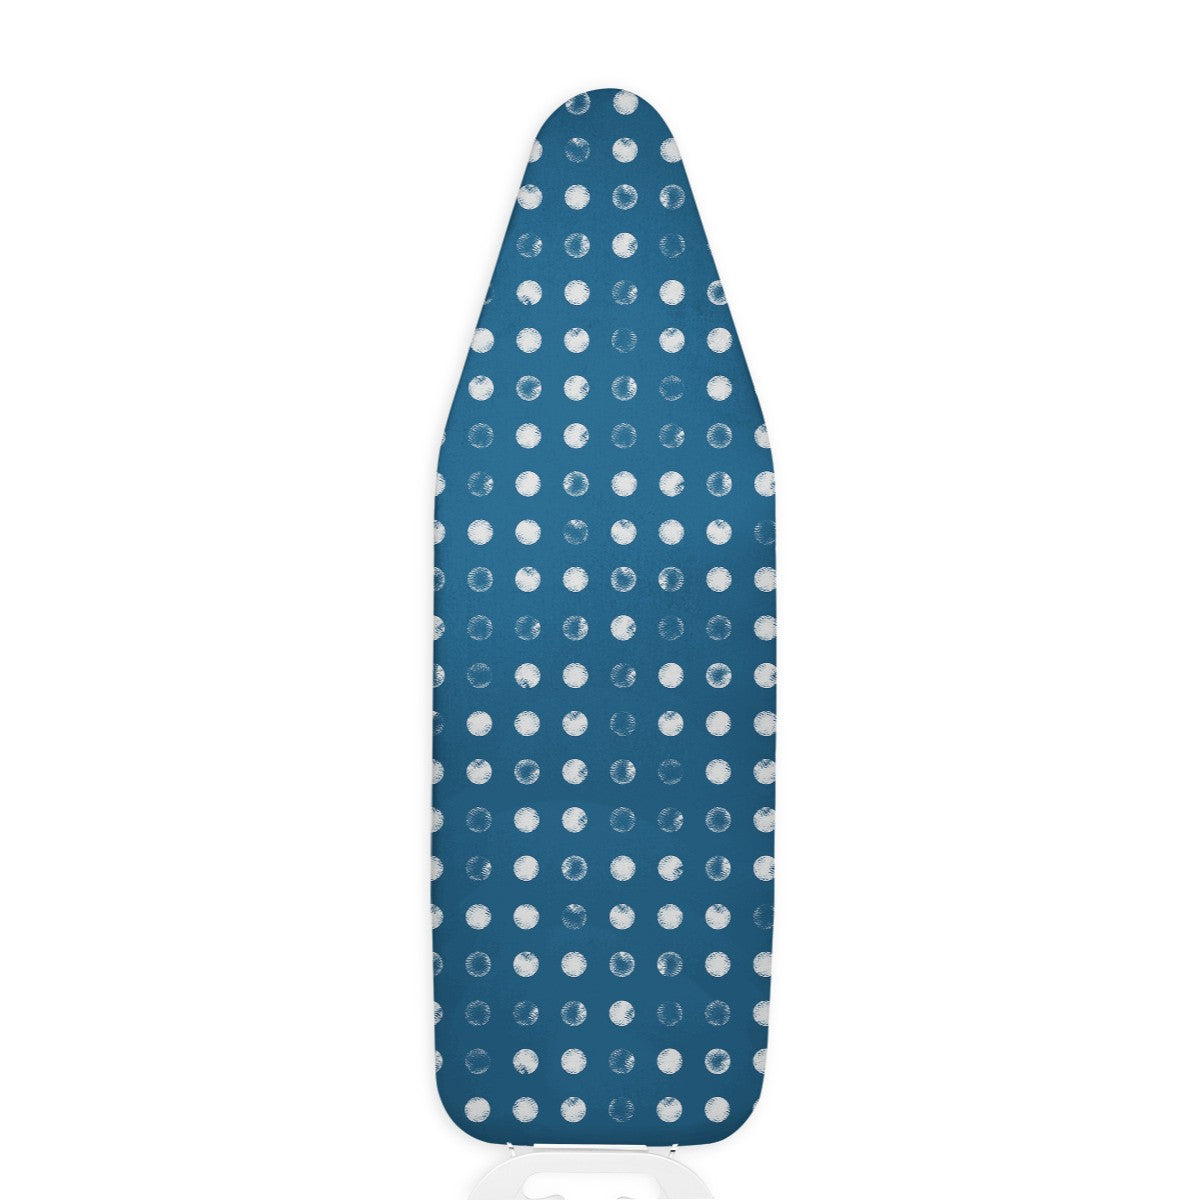 Combination Ironing Board Cover and 100 Percent WOOL IRONING PAD